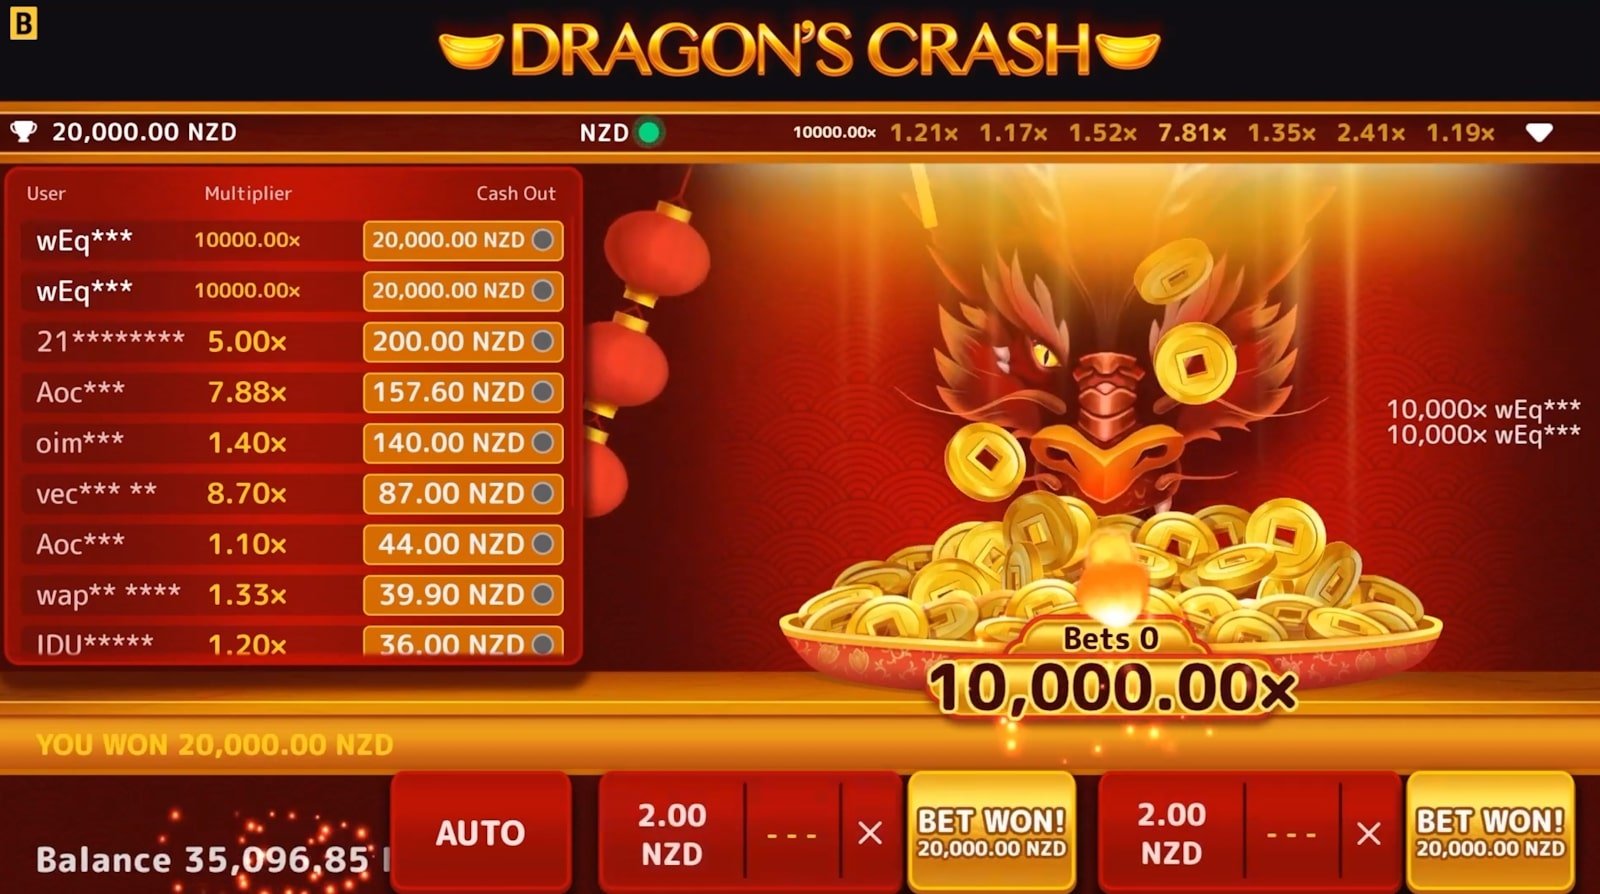 Dragon’s Crash Rewards Lucky Player with Two Max Wins